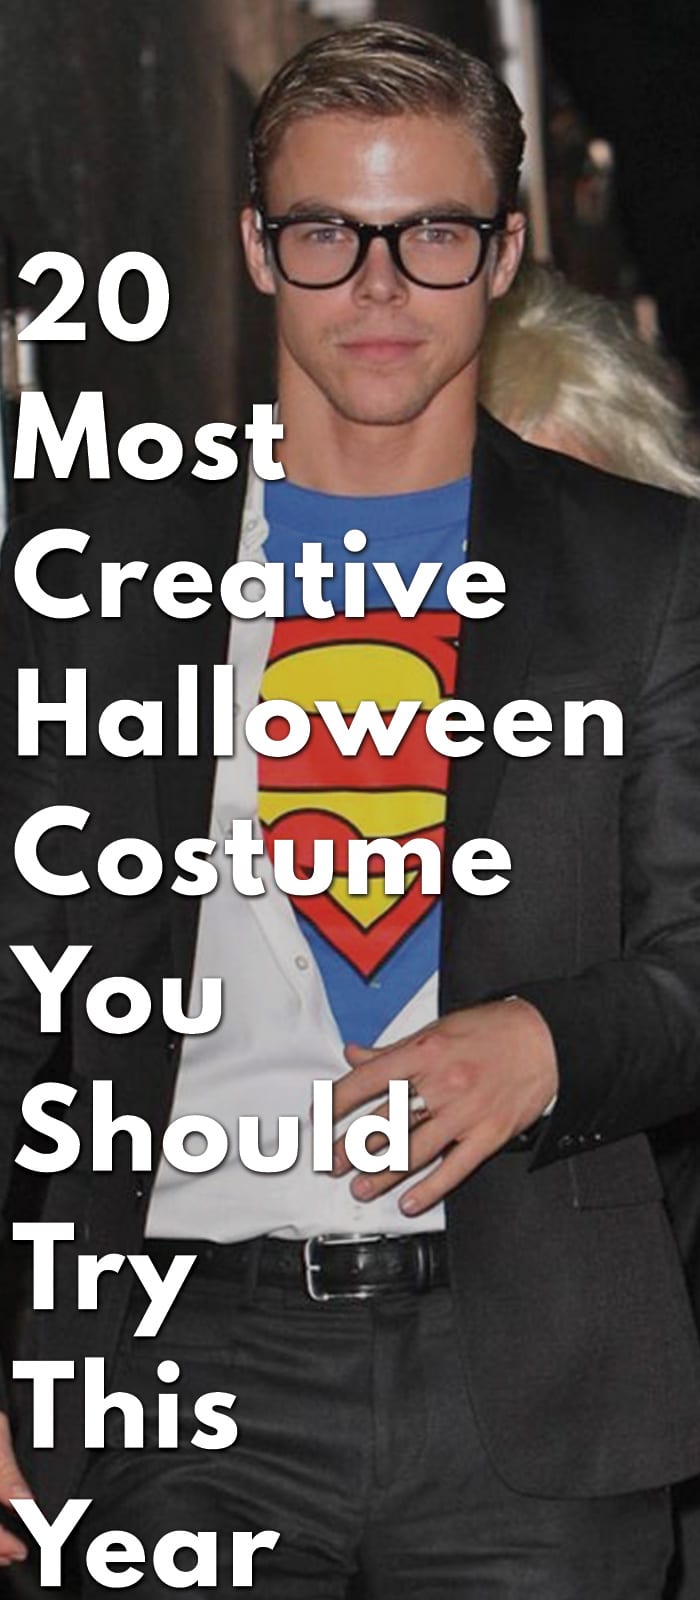 20-MOst-Creative-Halloween-Costume-You-Should-Try-This-Year